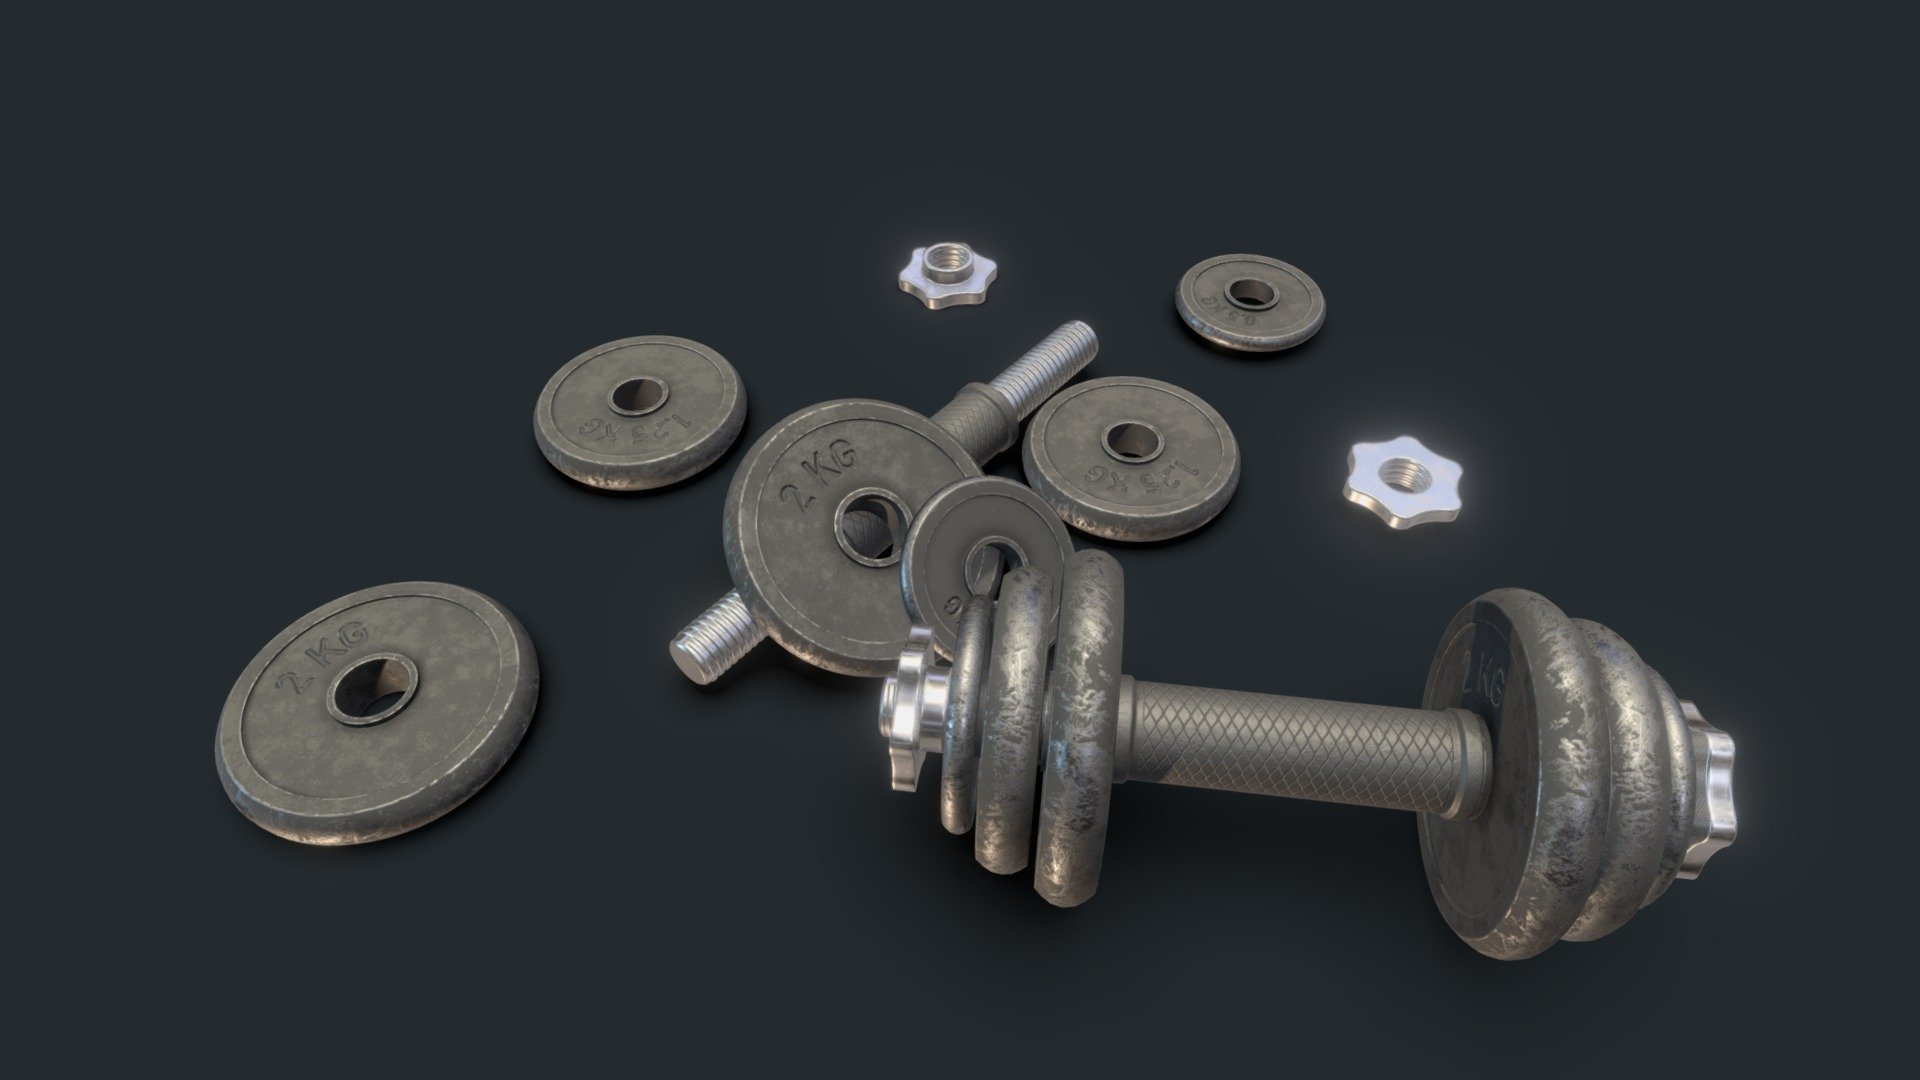 When your too lazy to work out and start modelling your equipment instead&hellip; oh well the excuses^^ - Modular Dumbbell - 3D model by Zaxel 3d model